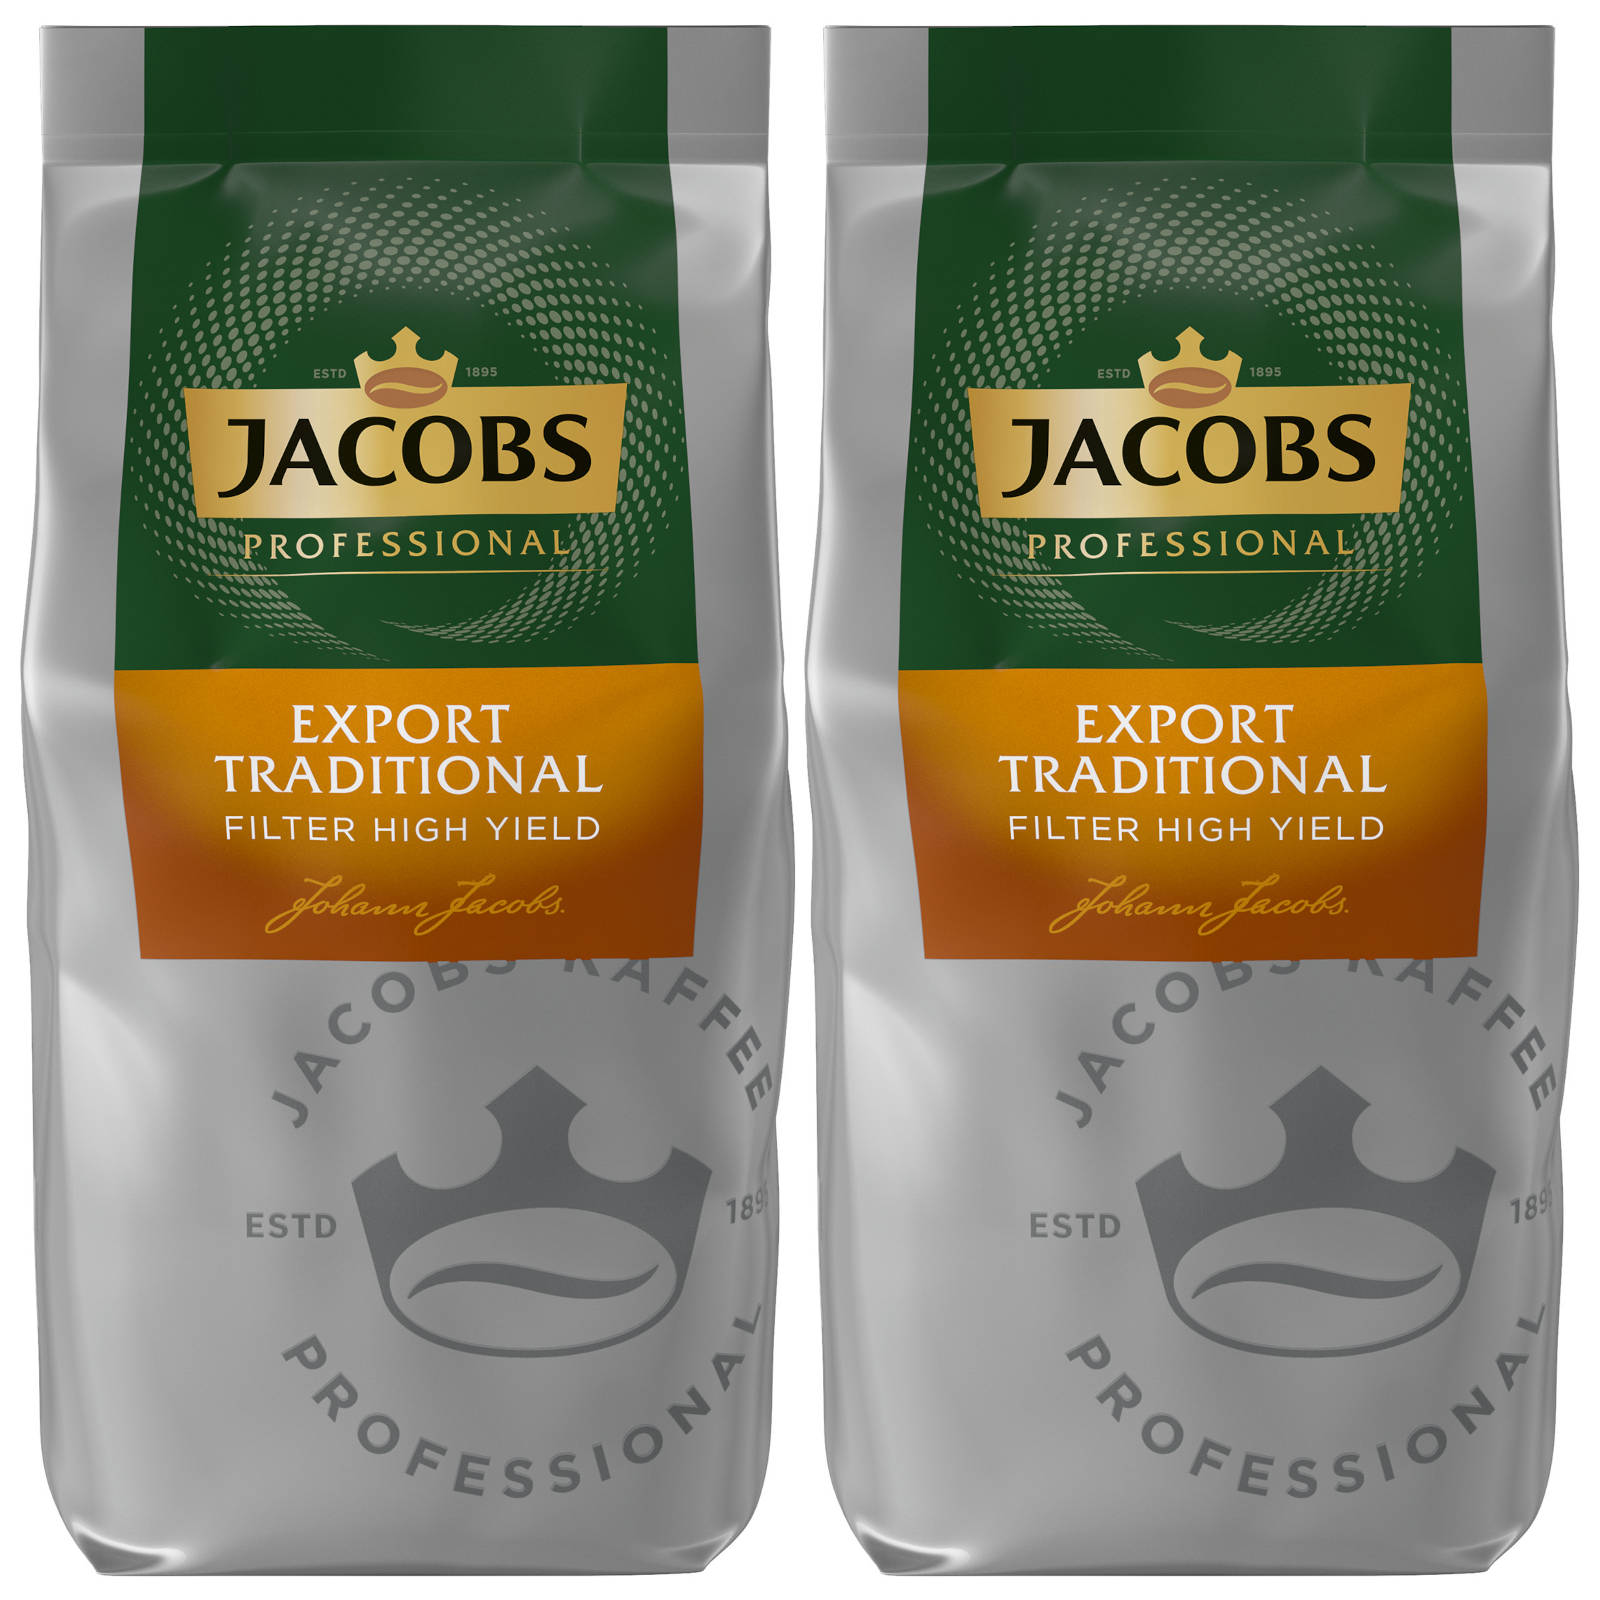 JACOBS Professional Export Traditional High 2x800g Filterkaffee (Filtermaschinen, Yield French Press)